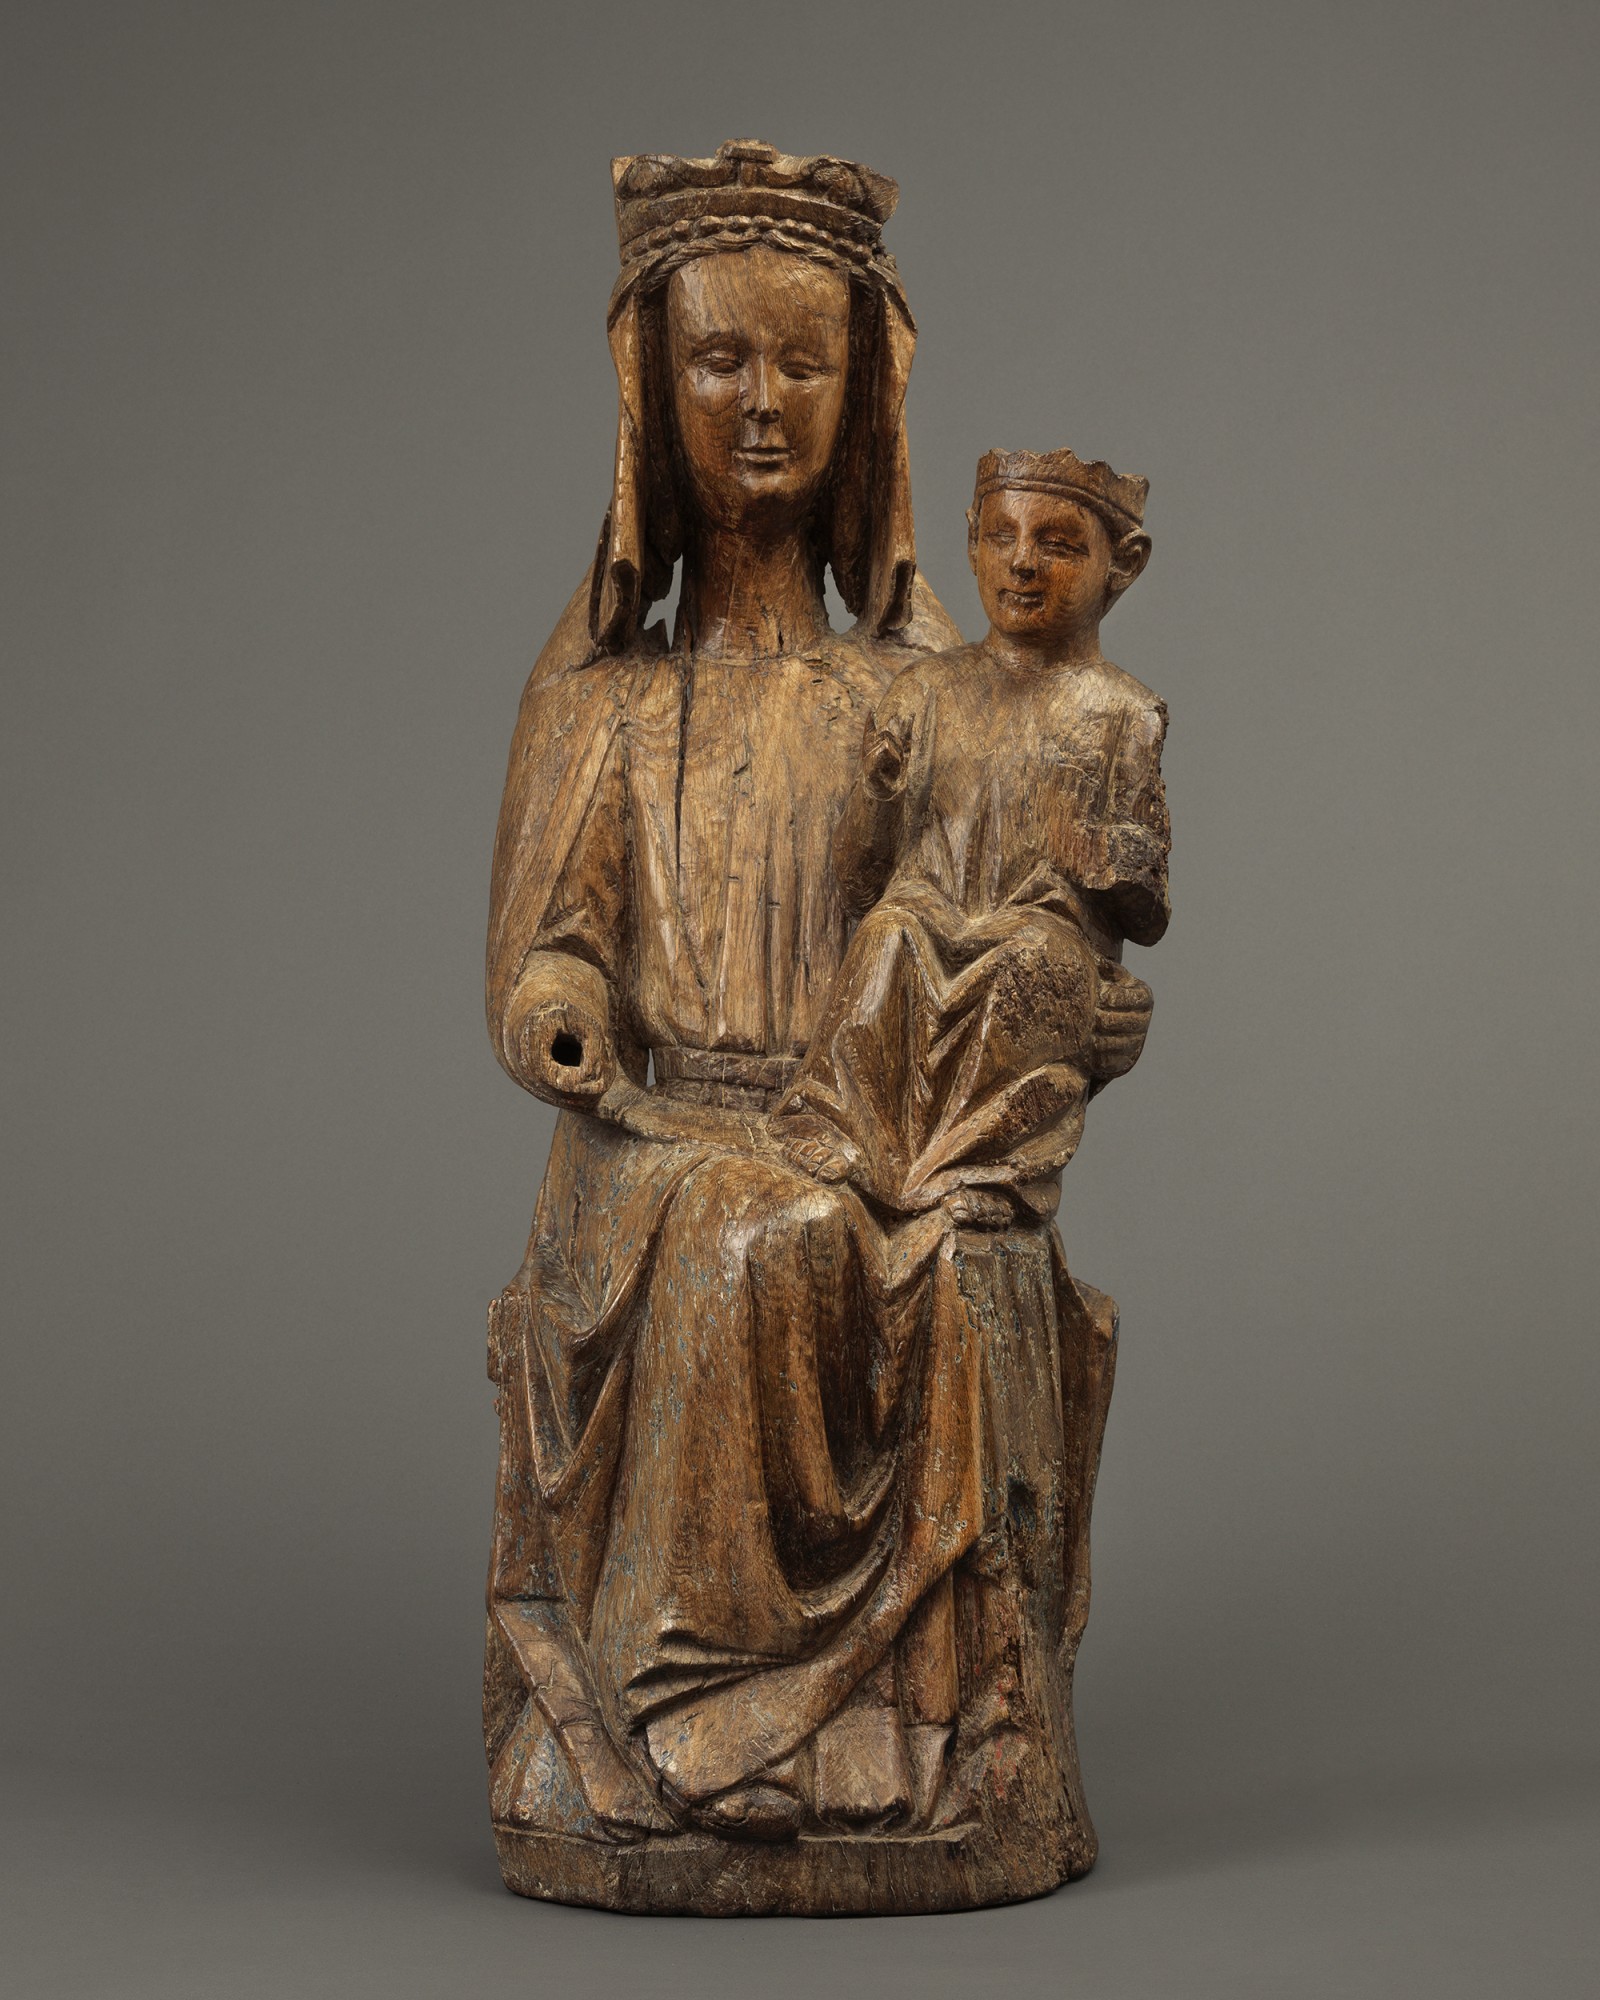 Sedes SapientiaeEnthroned Virgin and Child, Northern France, c. 1300